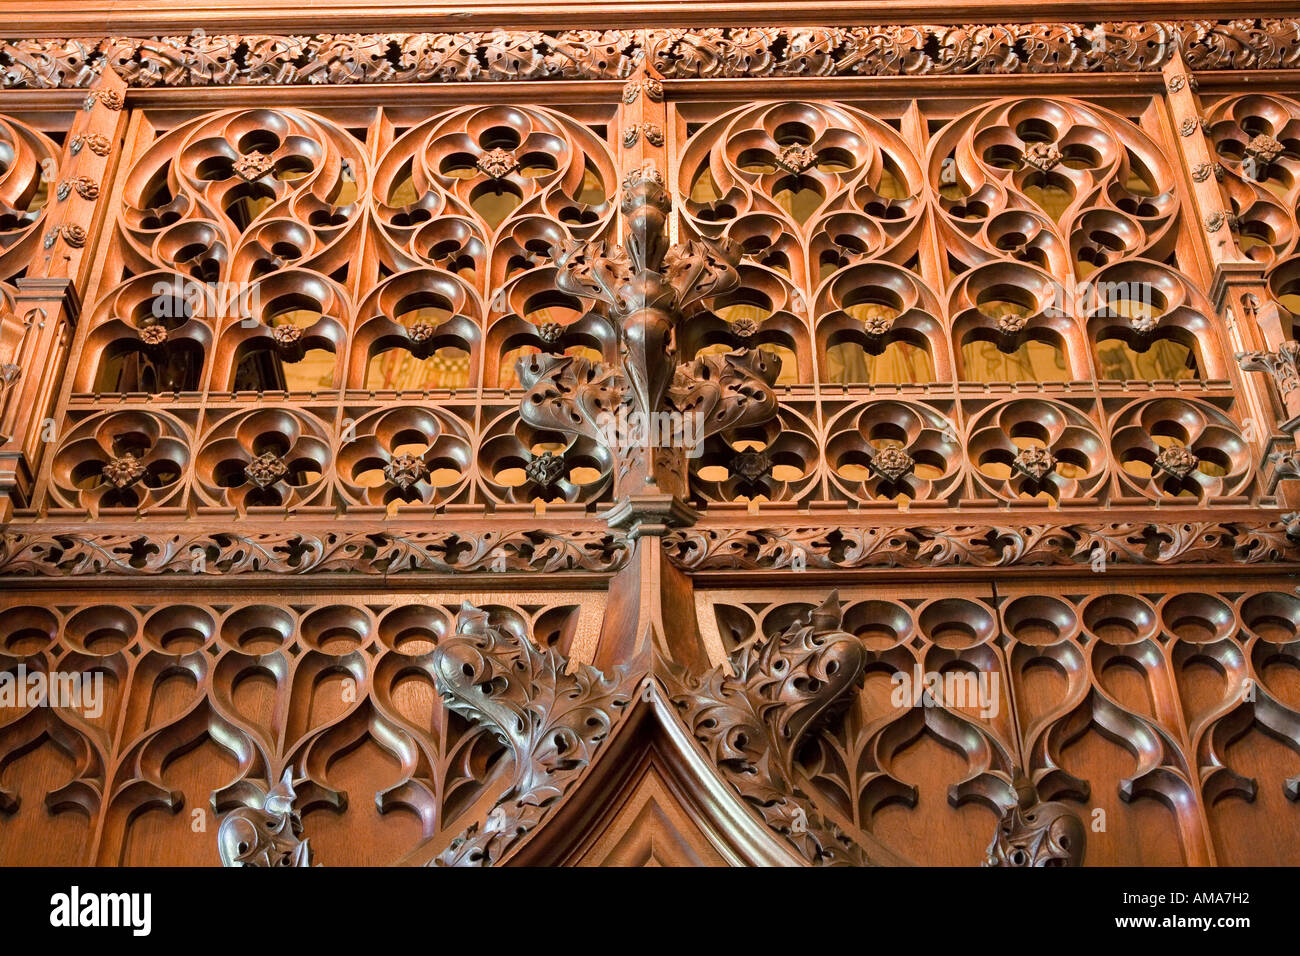 Wales Cardiff Cardiff Castle Banqueting Hall Minstrels Gallery carving detail Stock Photo